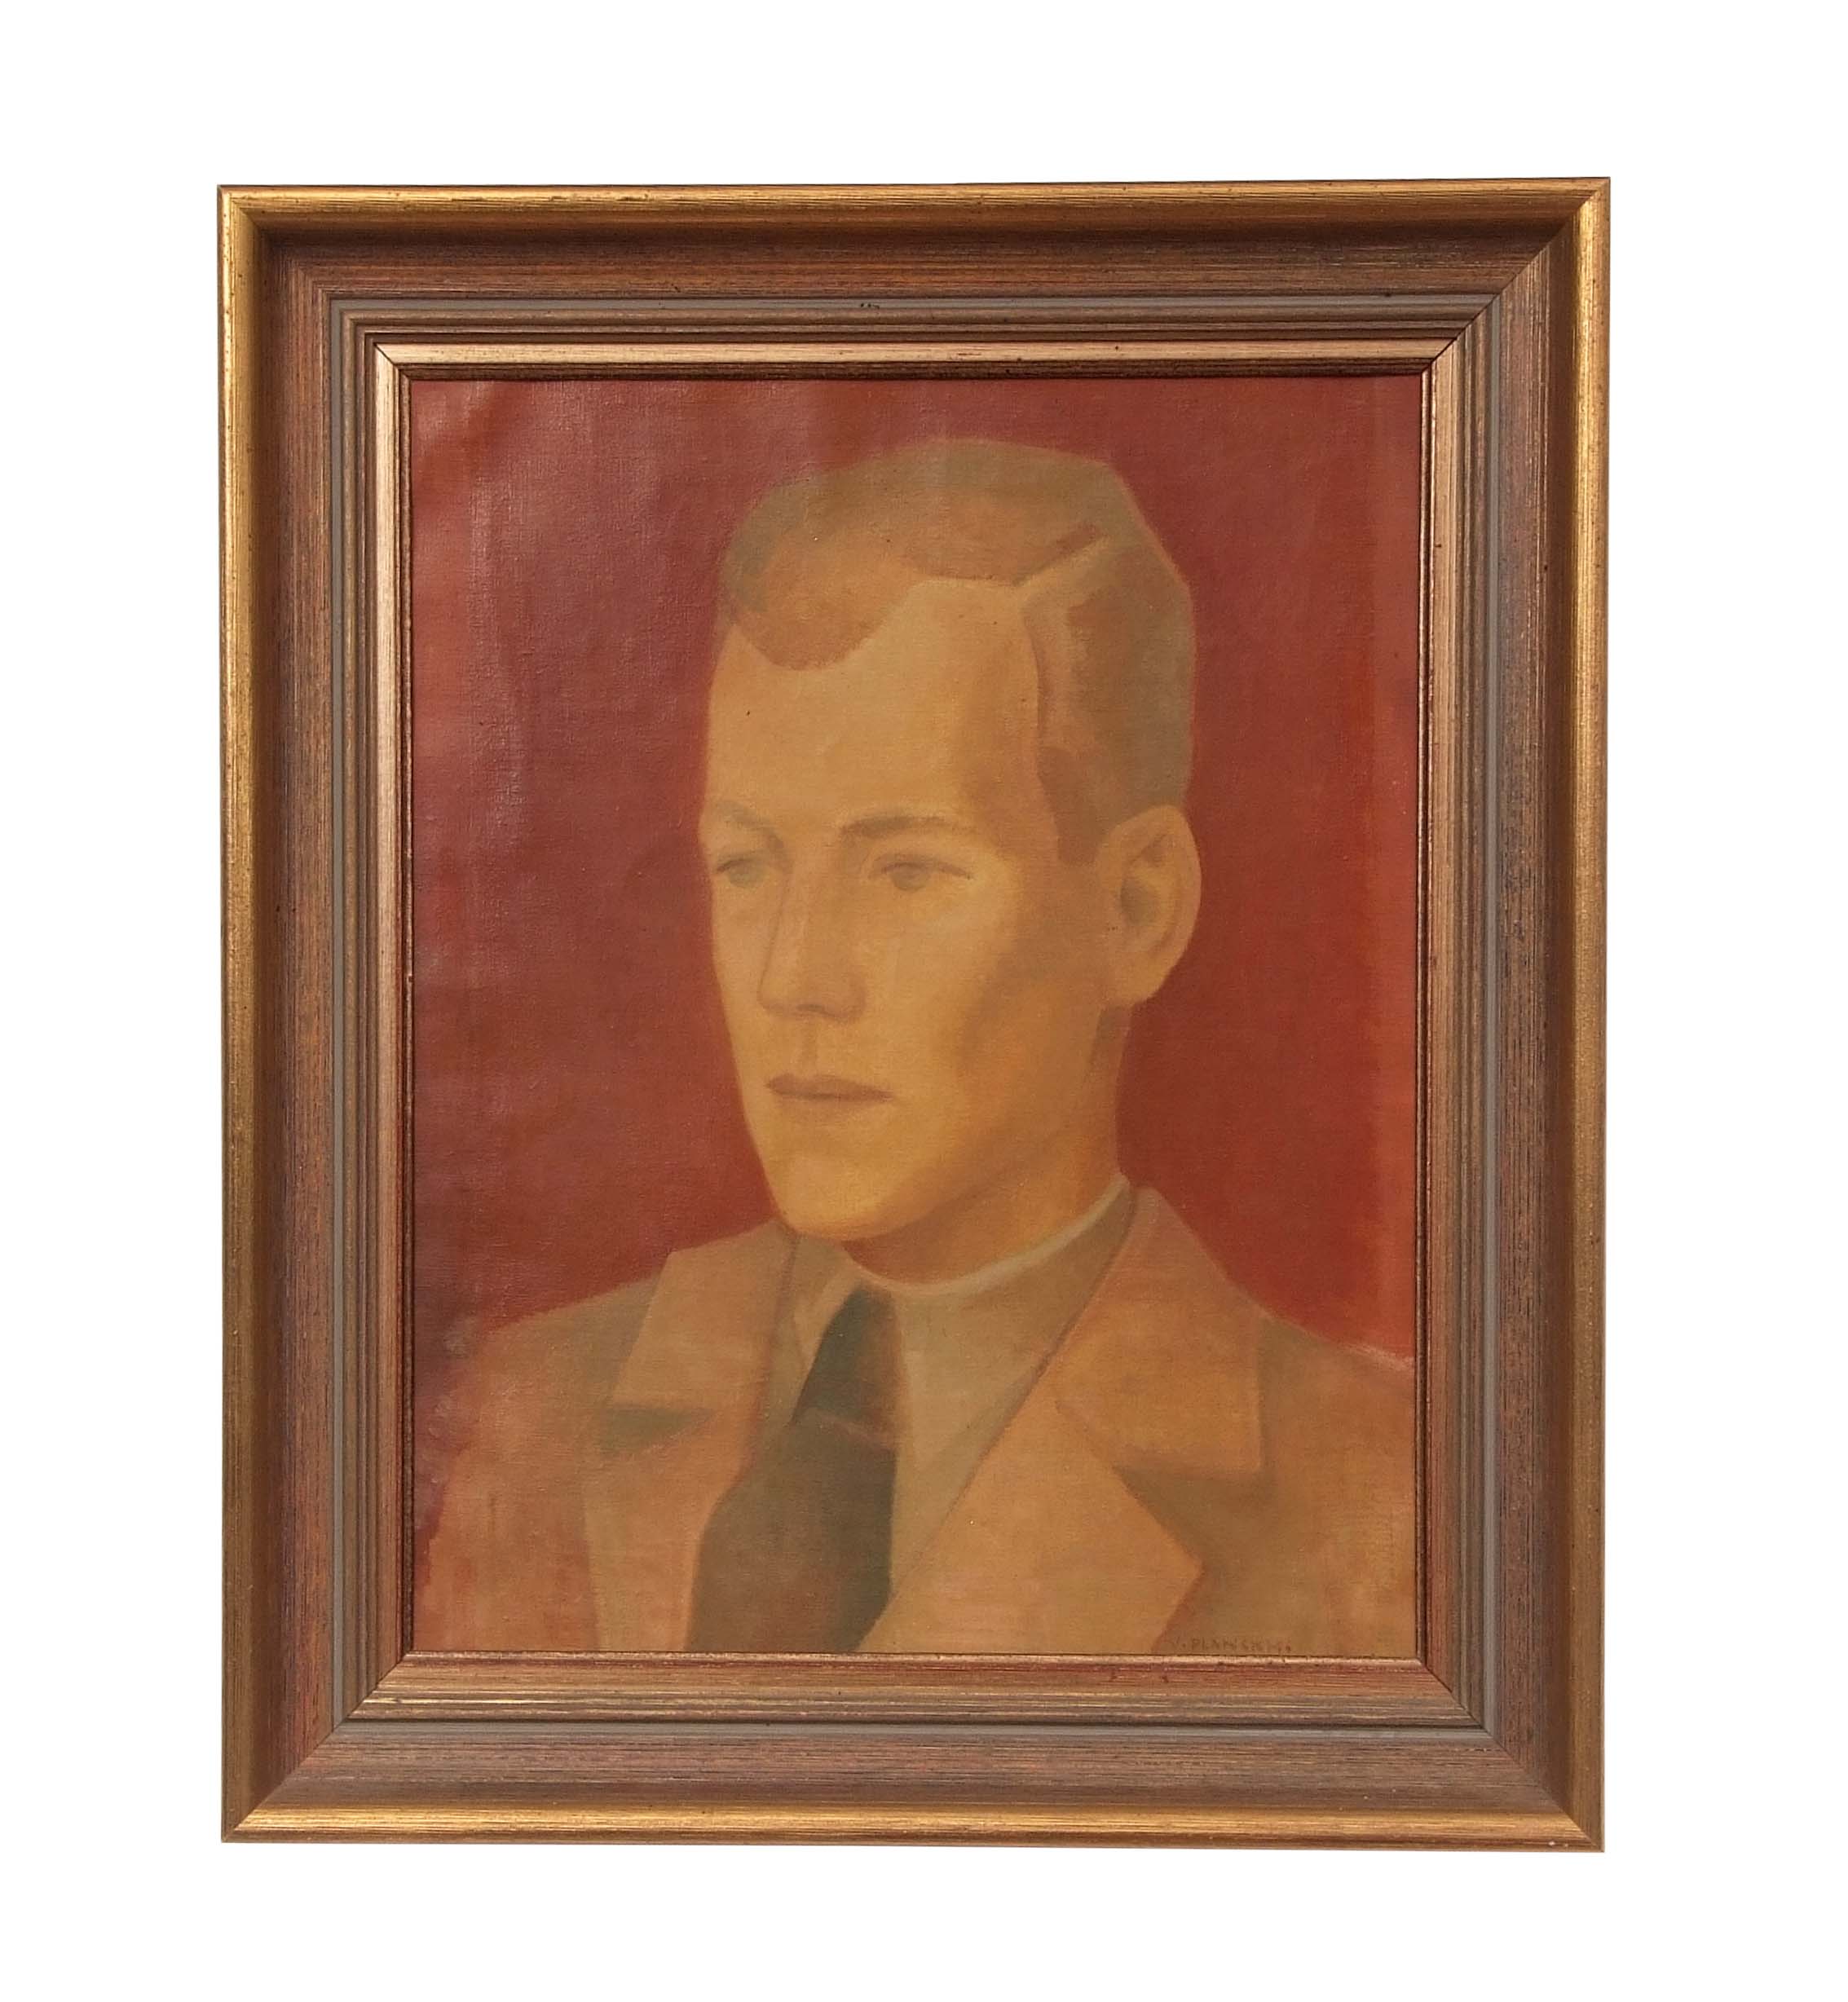 Viktor Planckh (1904-1941) Portrait of a gent wearing shirt and tie, oil on canvas, signed lower